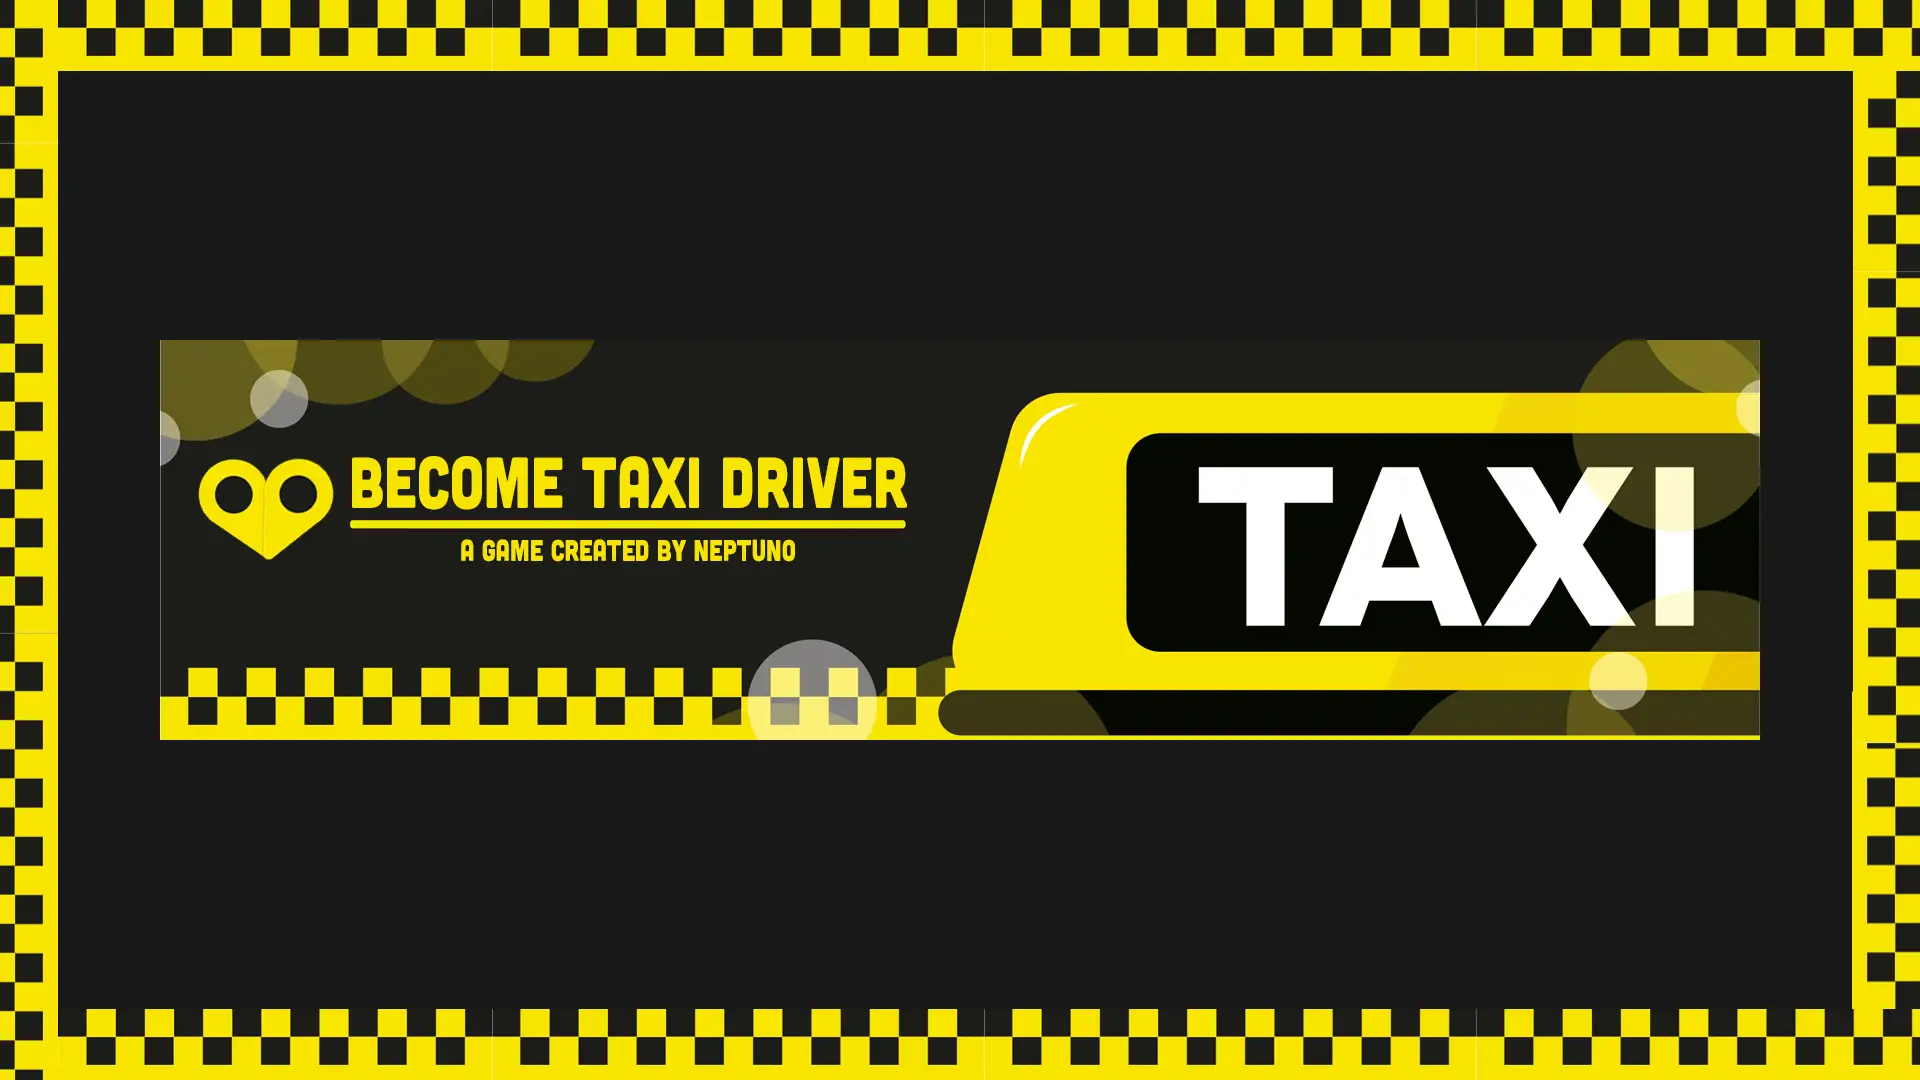 1920px x 1080px - HTML] Become Taxi Driver - v0.36 by Neptuno 18+ Adult xxx Porn Game Download